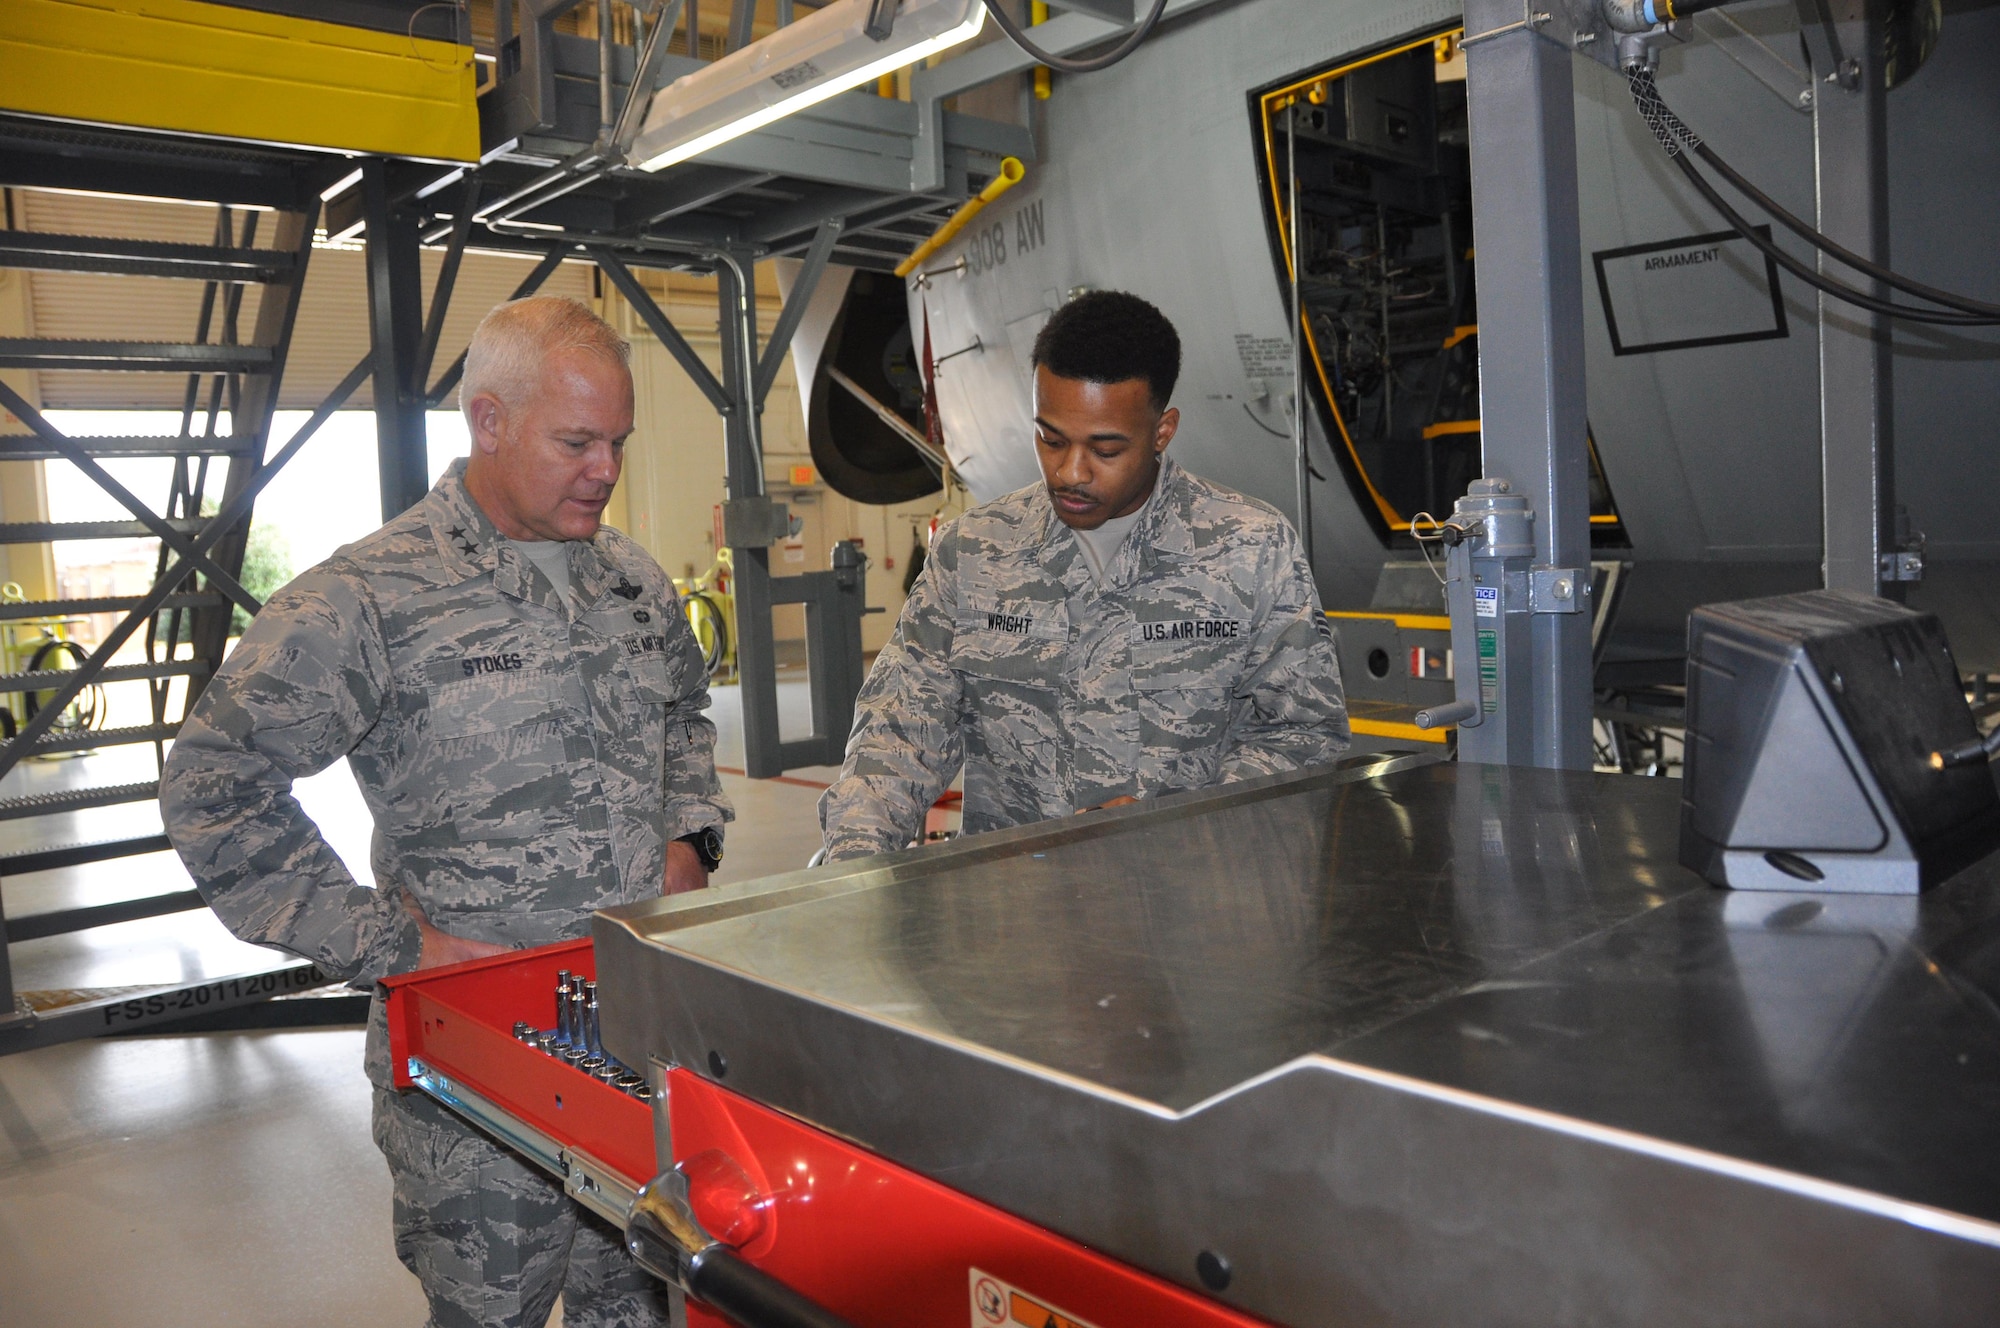 Commanding General of the 22nd Air Force, Maj. Gen. John Stokes, speaks to Senior Airman Irvin Wright of the 908th Maintenance Group during a visit to the 908th Airlift Wing Dec. 3 at Maxwell Air Force Base. Irvin demonstrates how the new smart tool boxes work, requiring indentification and keeping tabs on what is out of the box. (U.S. Air Force photo by Bradley J. Clark)